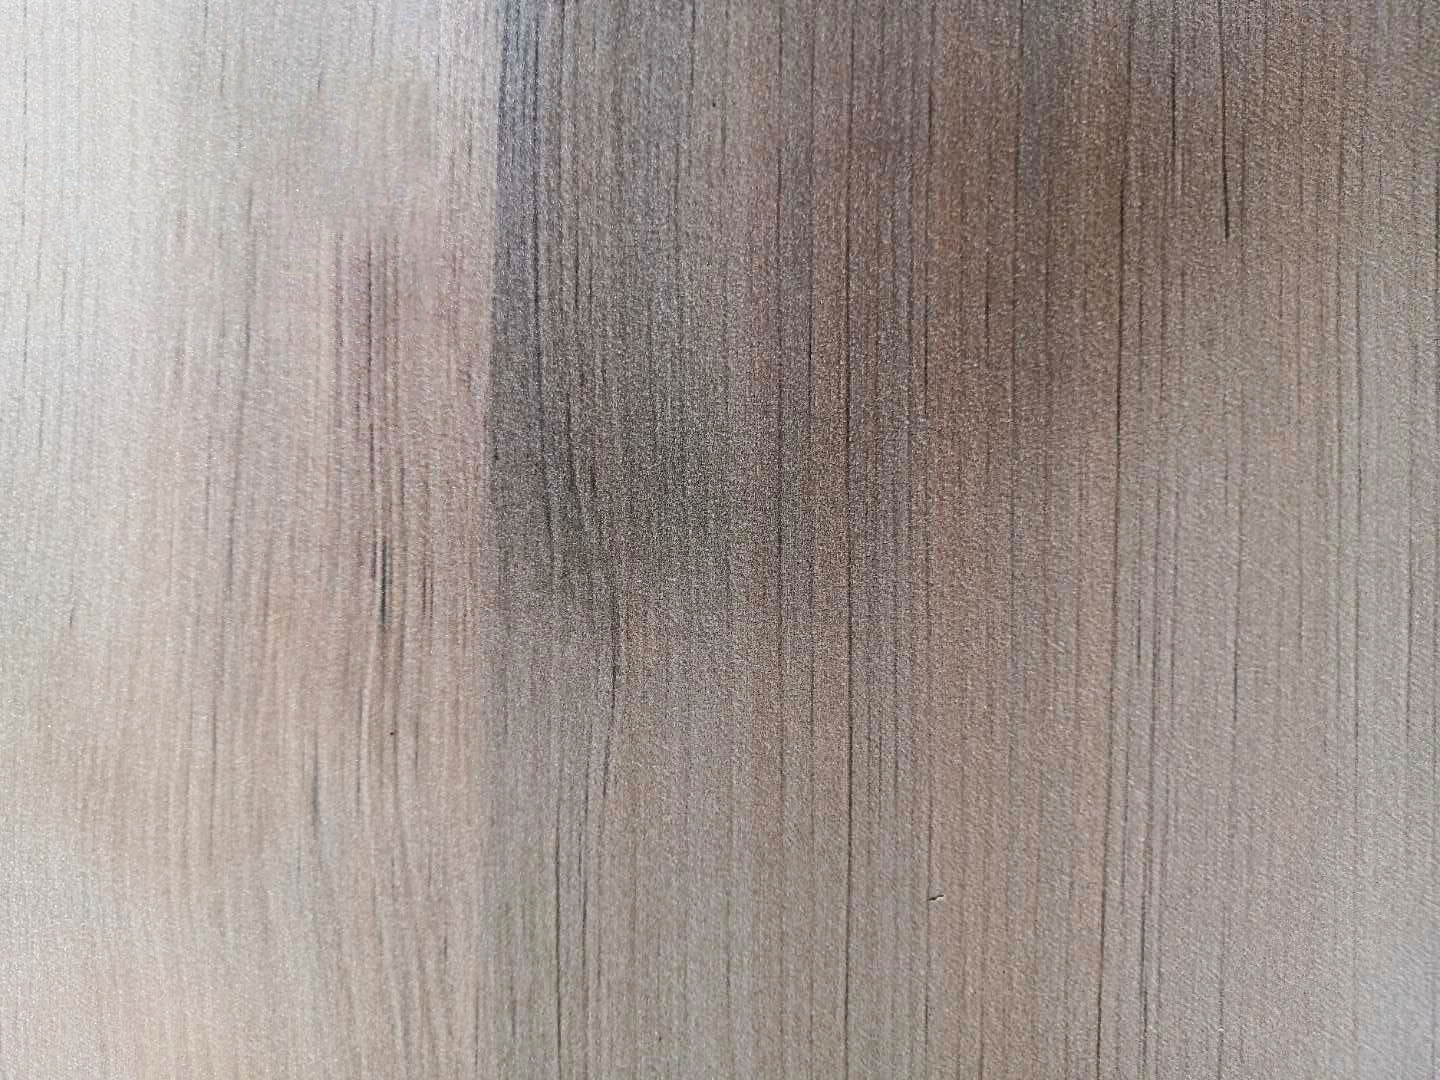 PAINT-FREE PLYWOOD